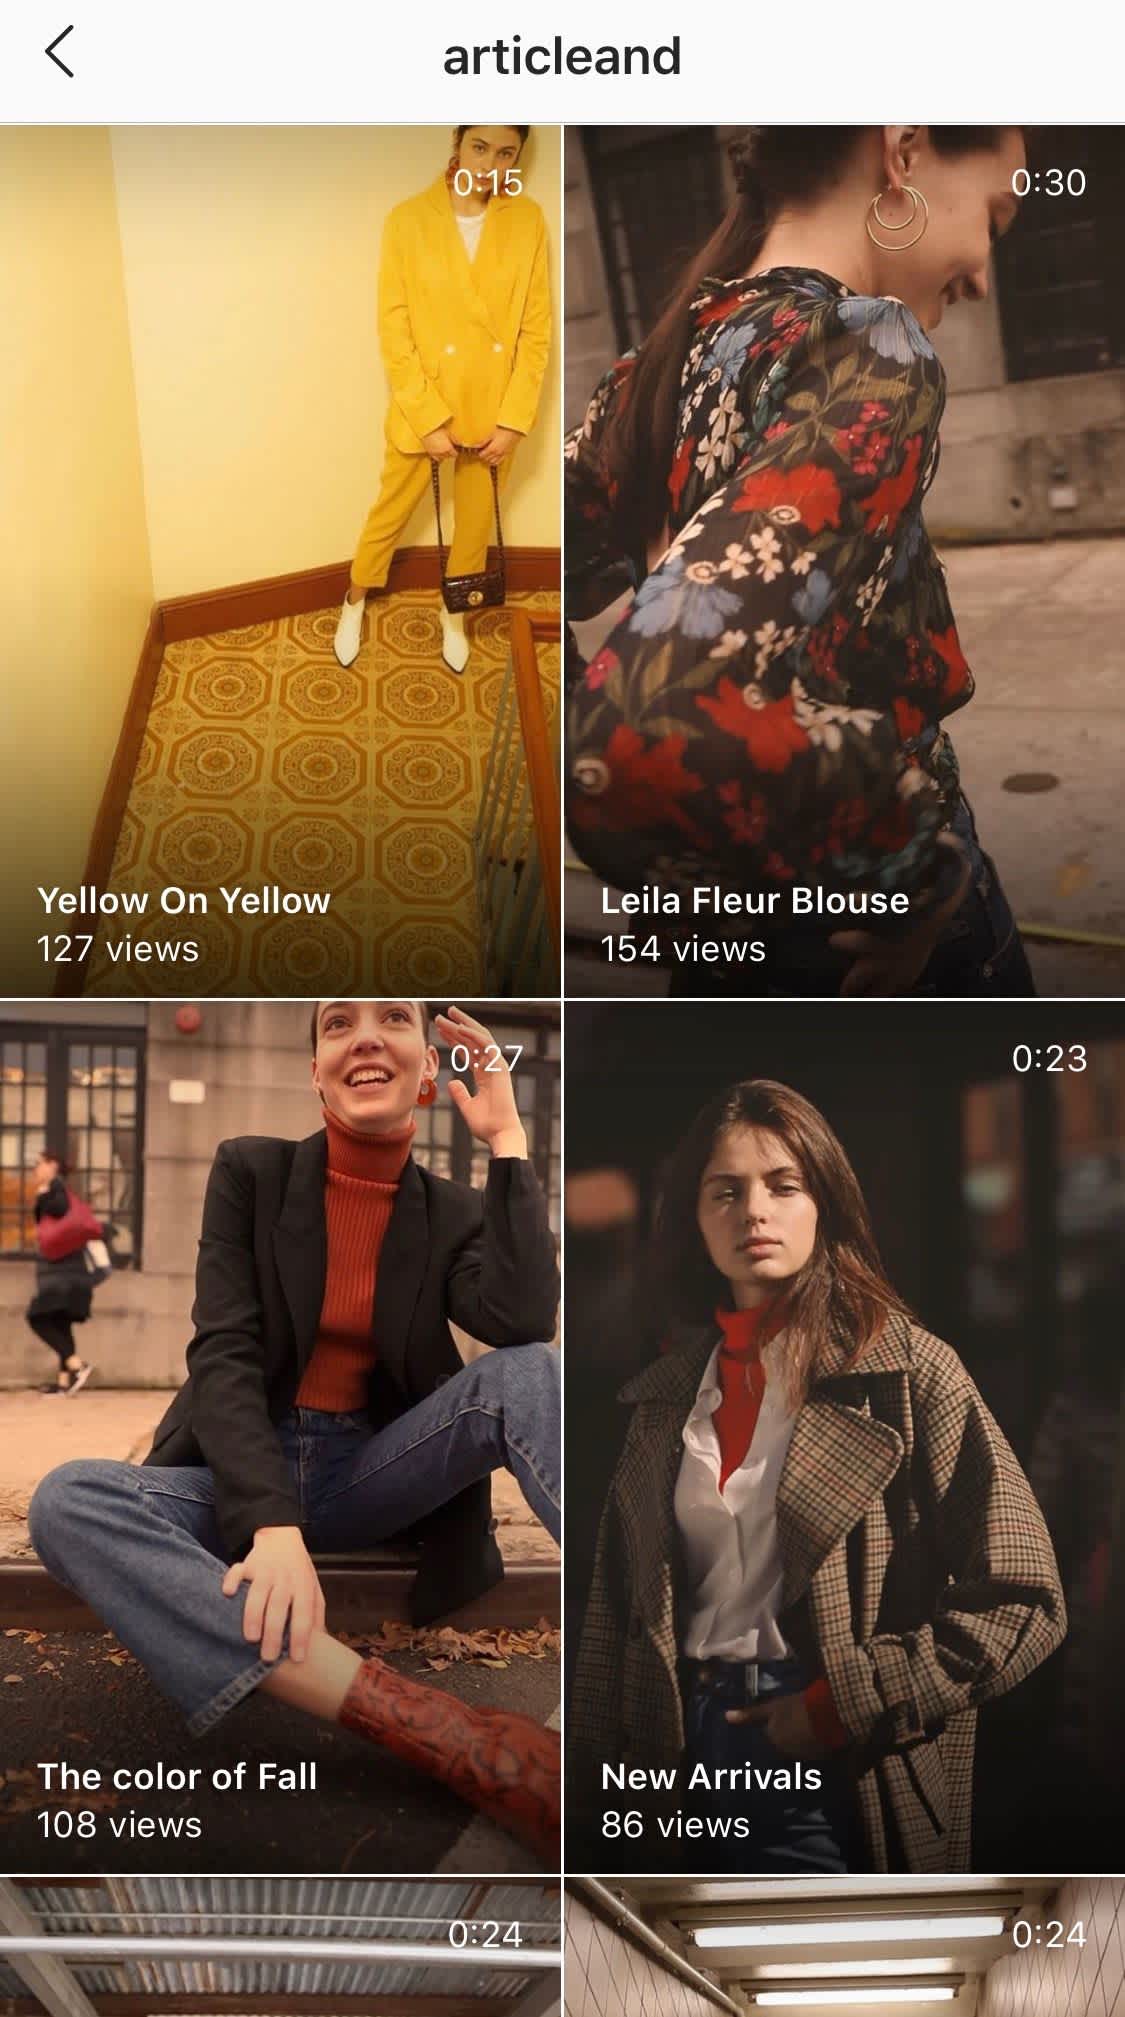 The clothing store ArticleAnd has gone all-in on IGTV, a new platform to show off new arrivals, color collections, and outfits.